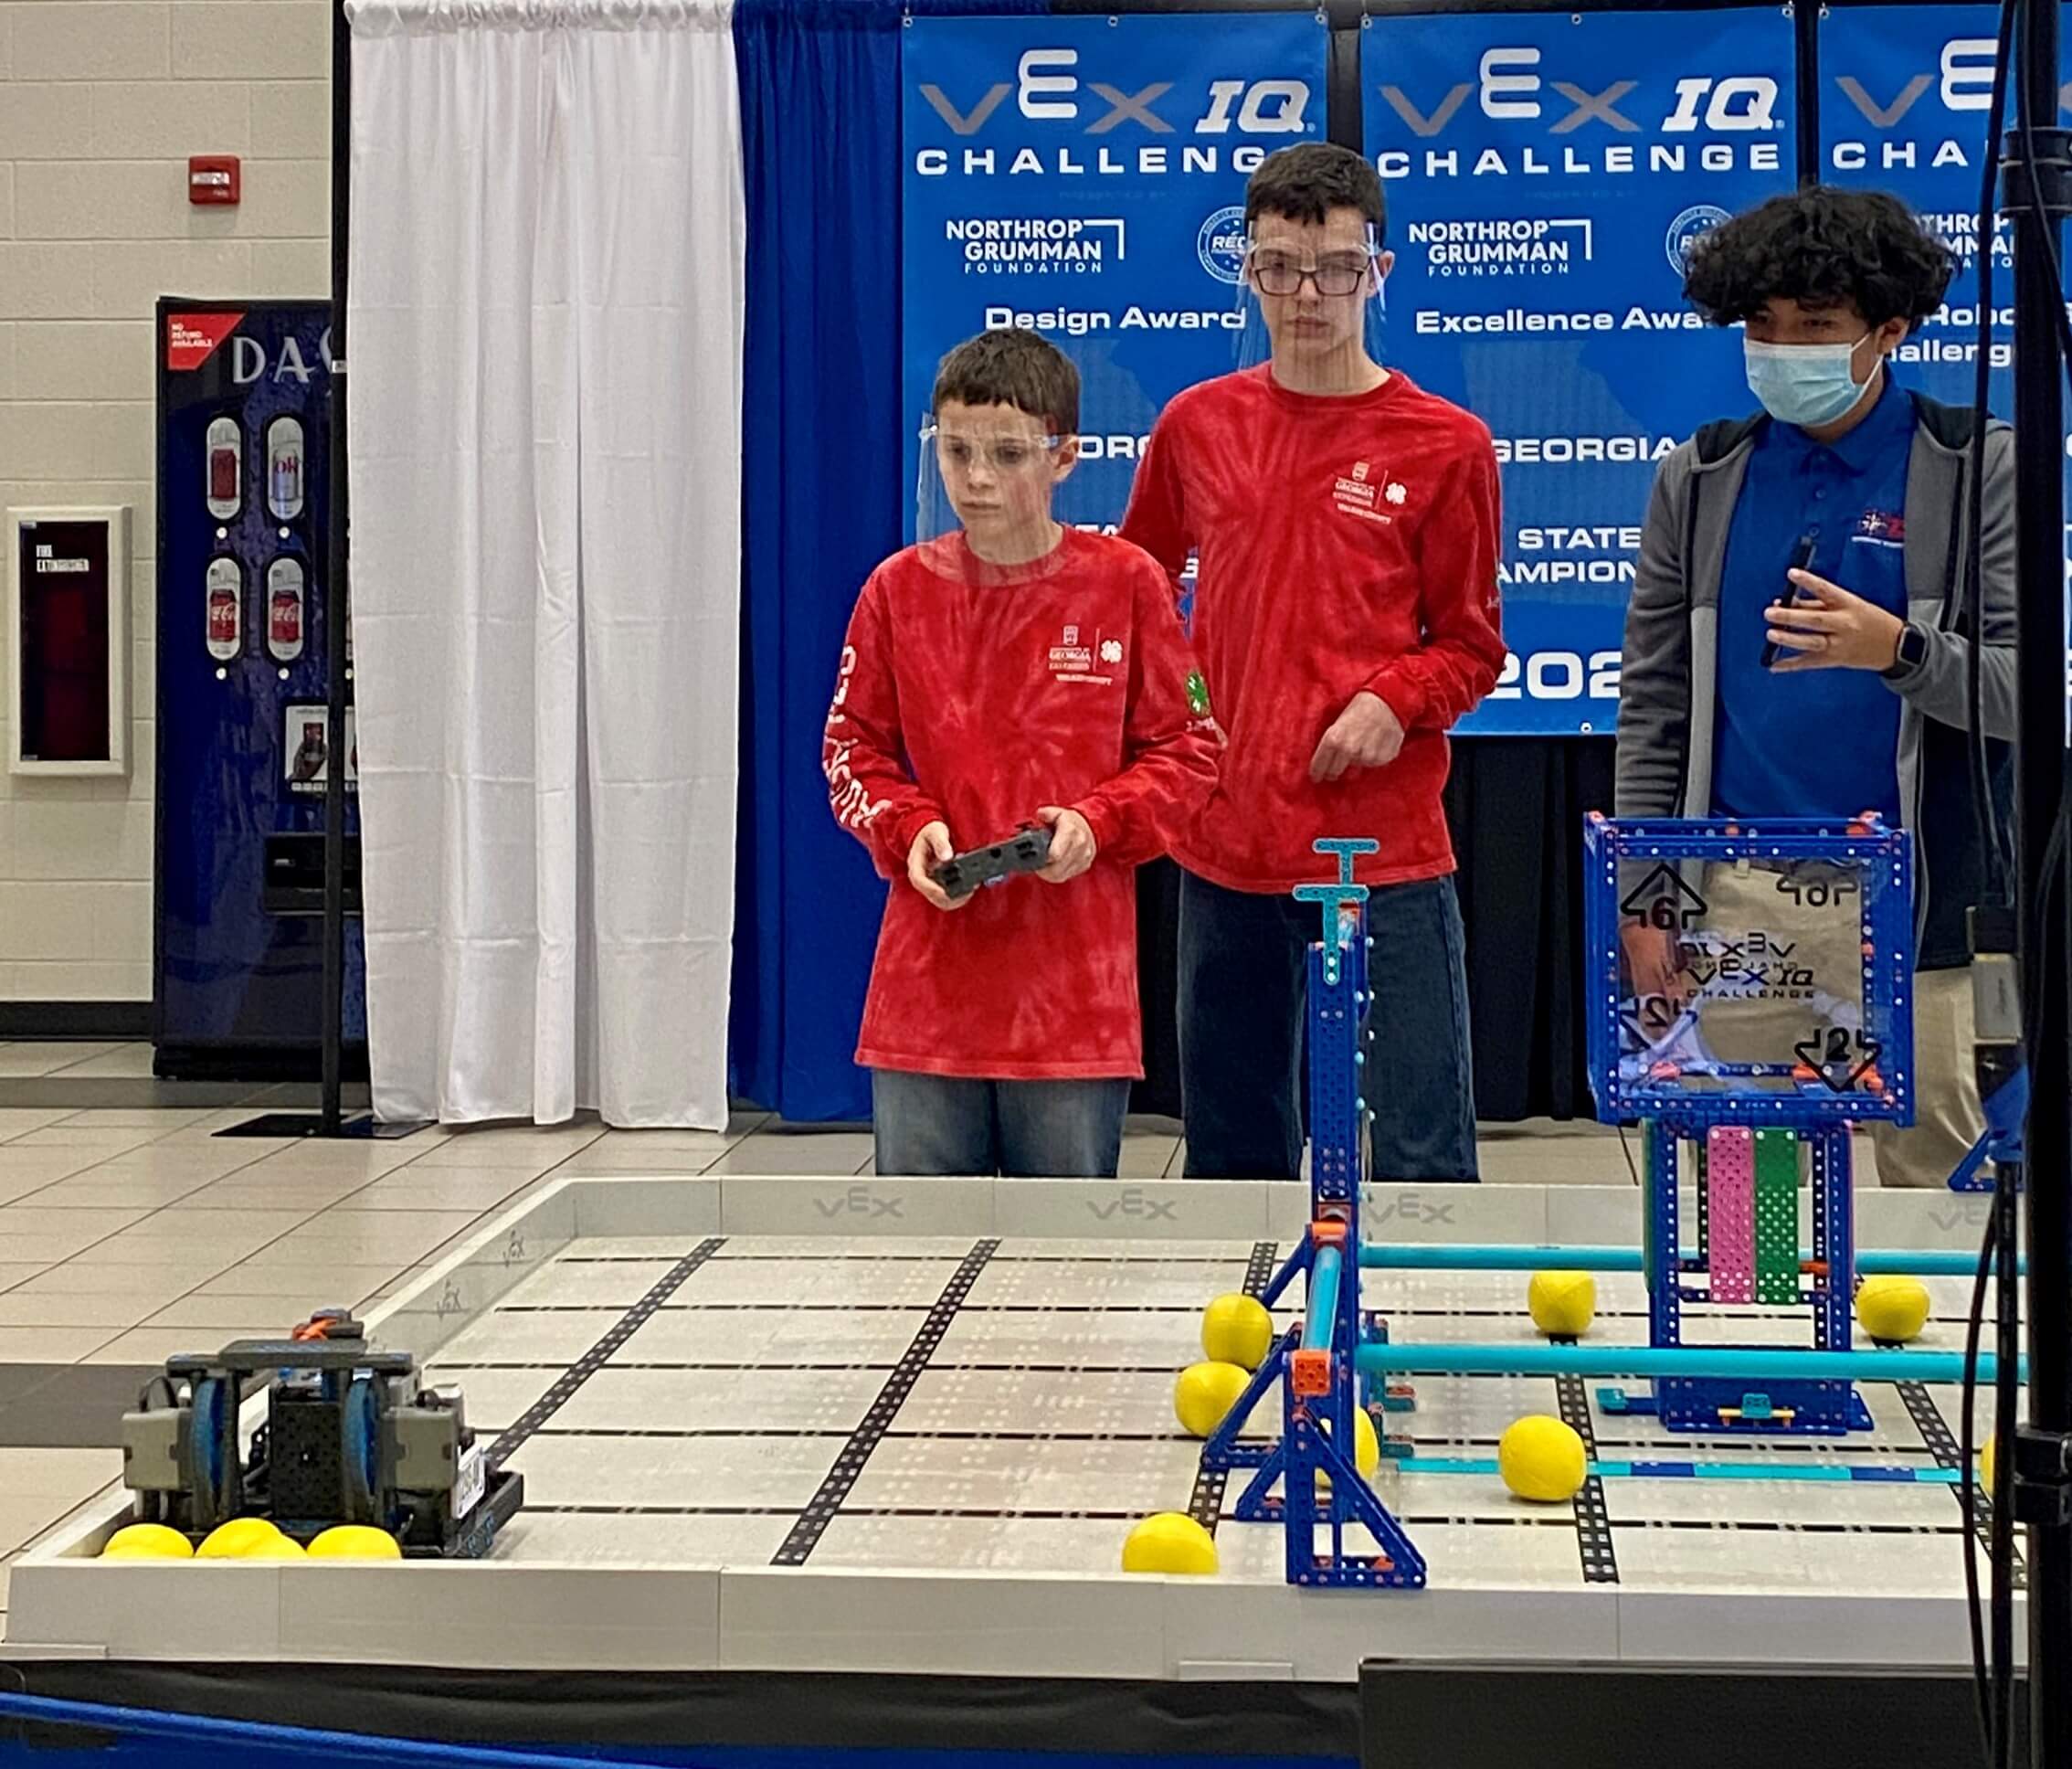 Members of the Dawgbytes team participate in a challenge at the Georgia VEX IQ Challenge Robotics competition while another participant looks on.